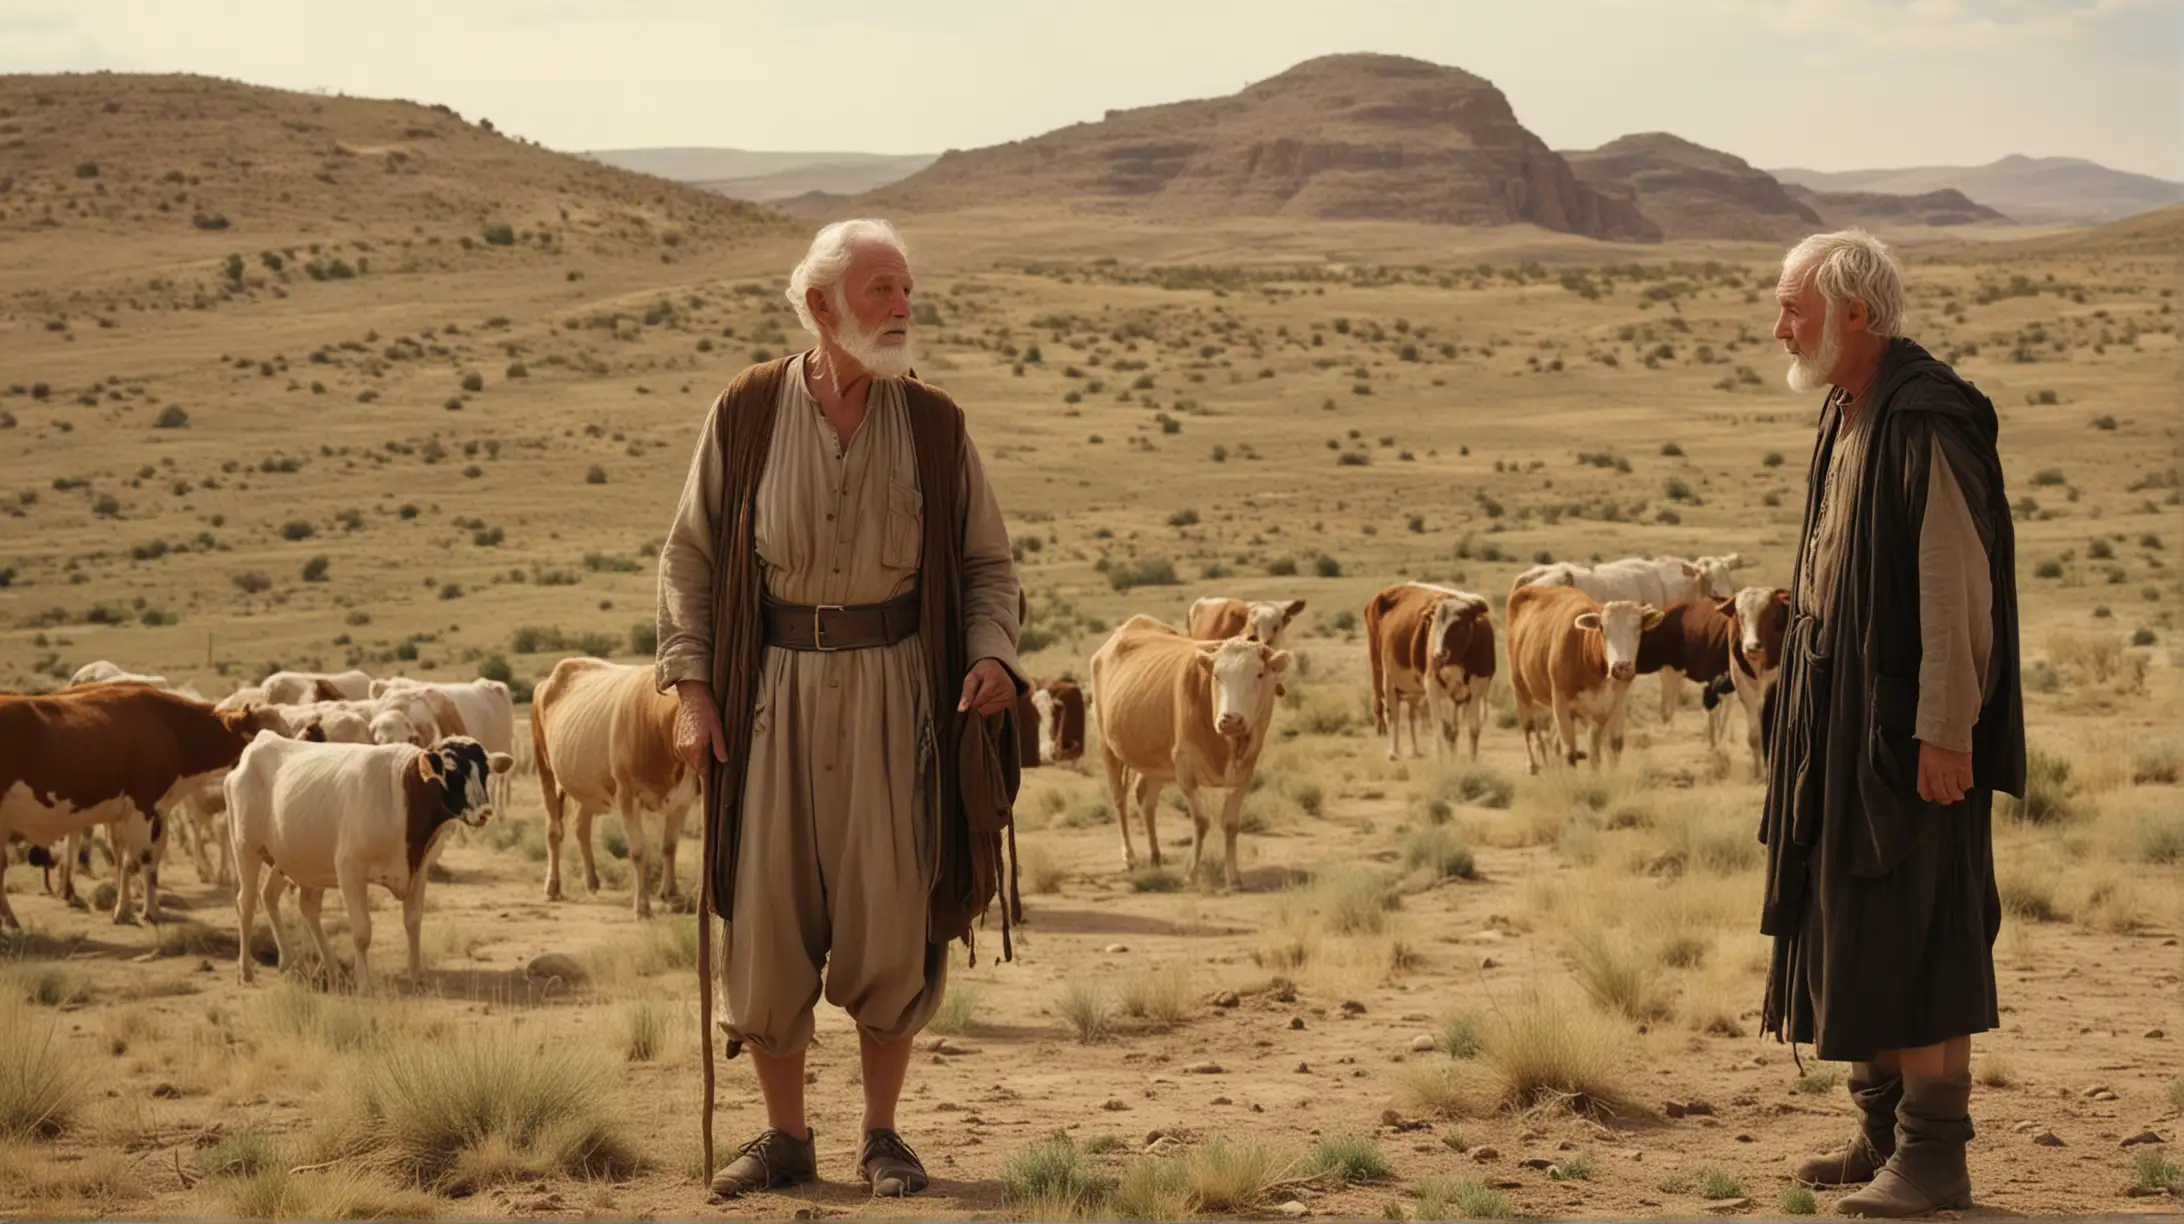 2 old men talking in a desert hilly field, with a few different young men in the background, and some livestock.  Set during the biblical era of King David.